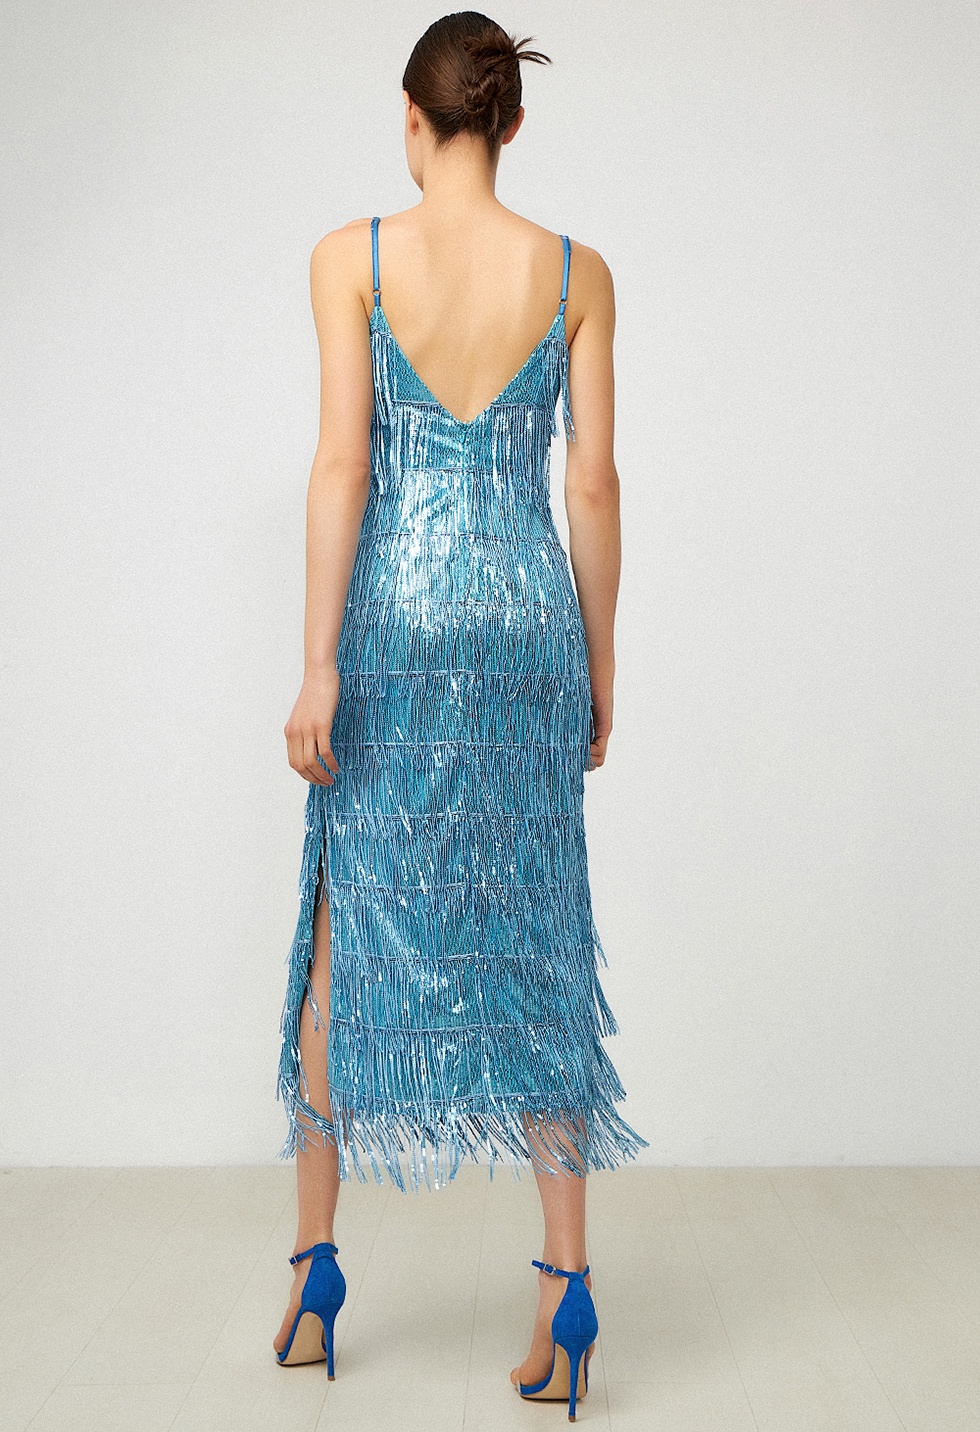 Evening dress with sequin fringe